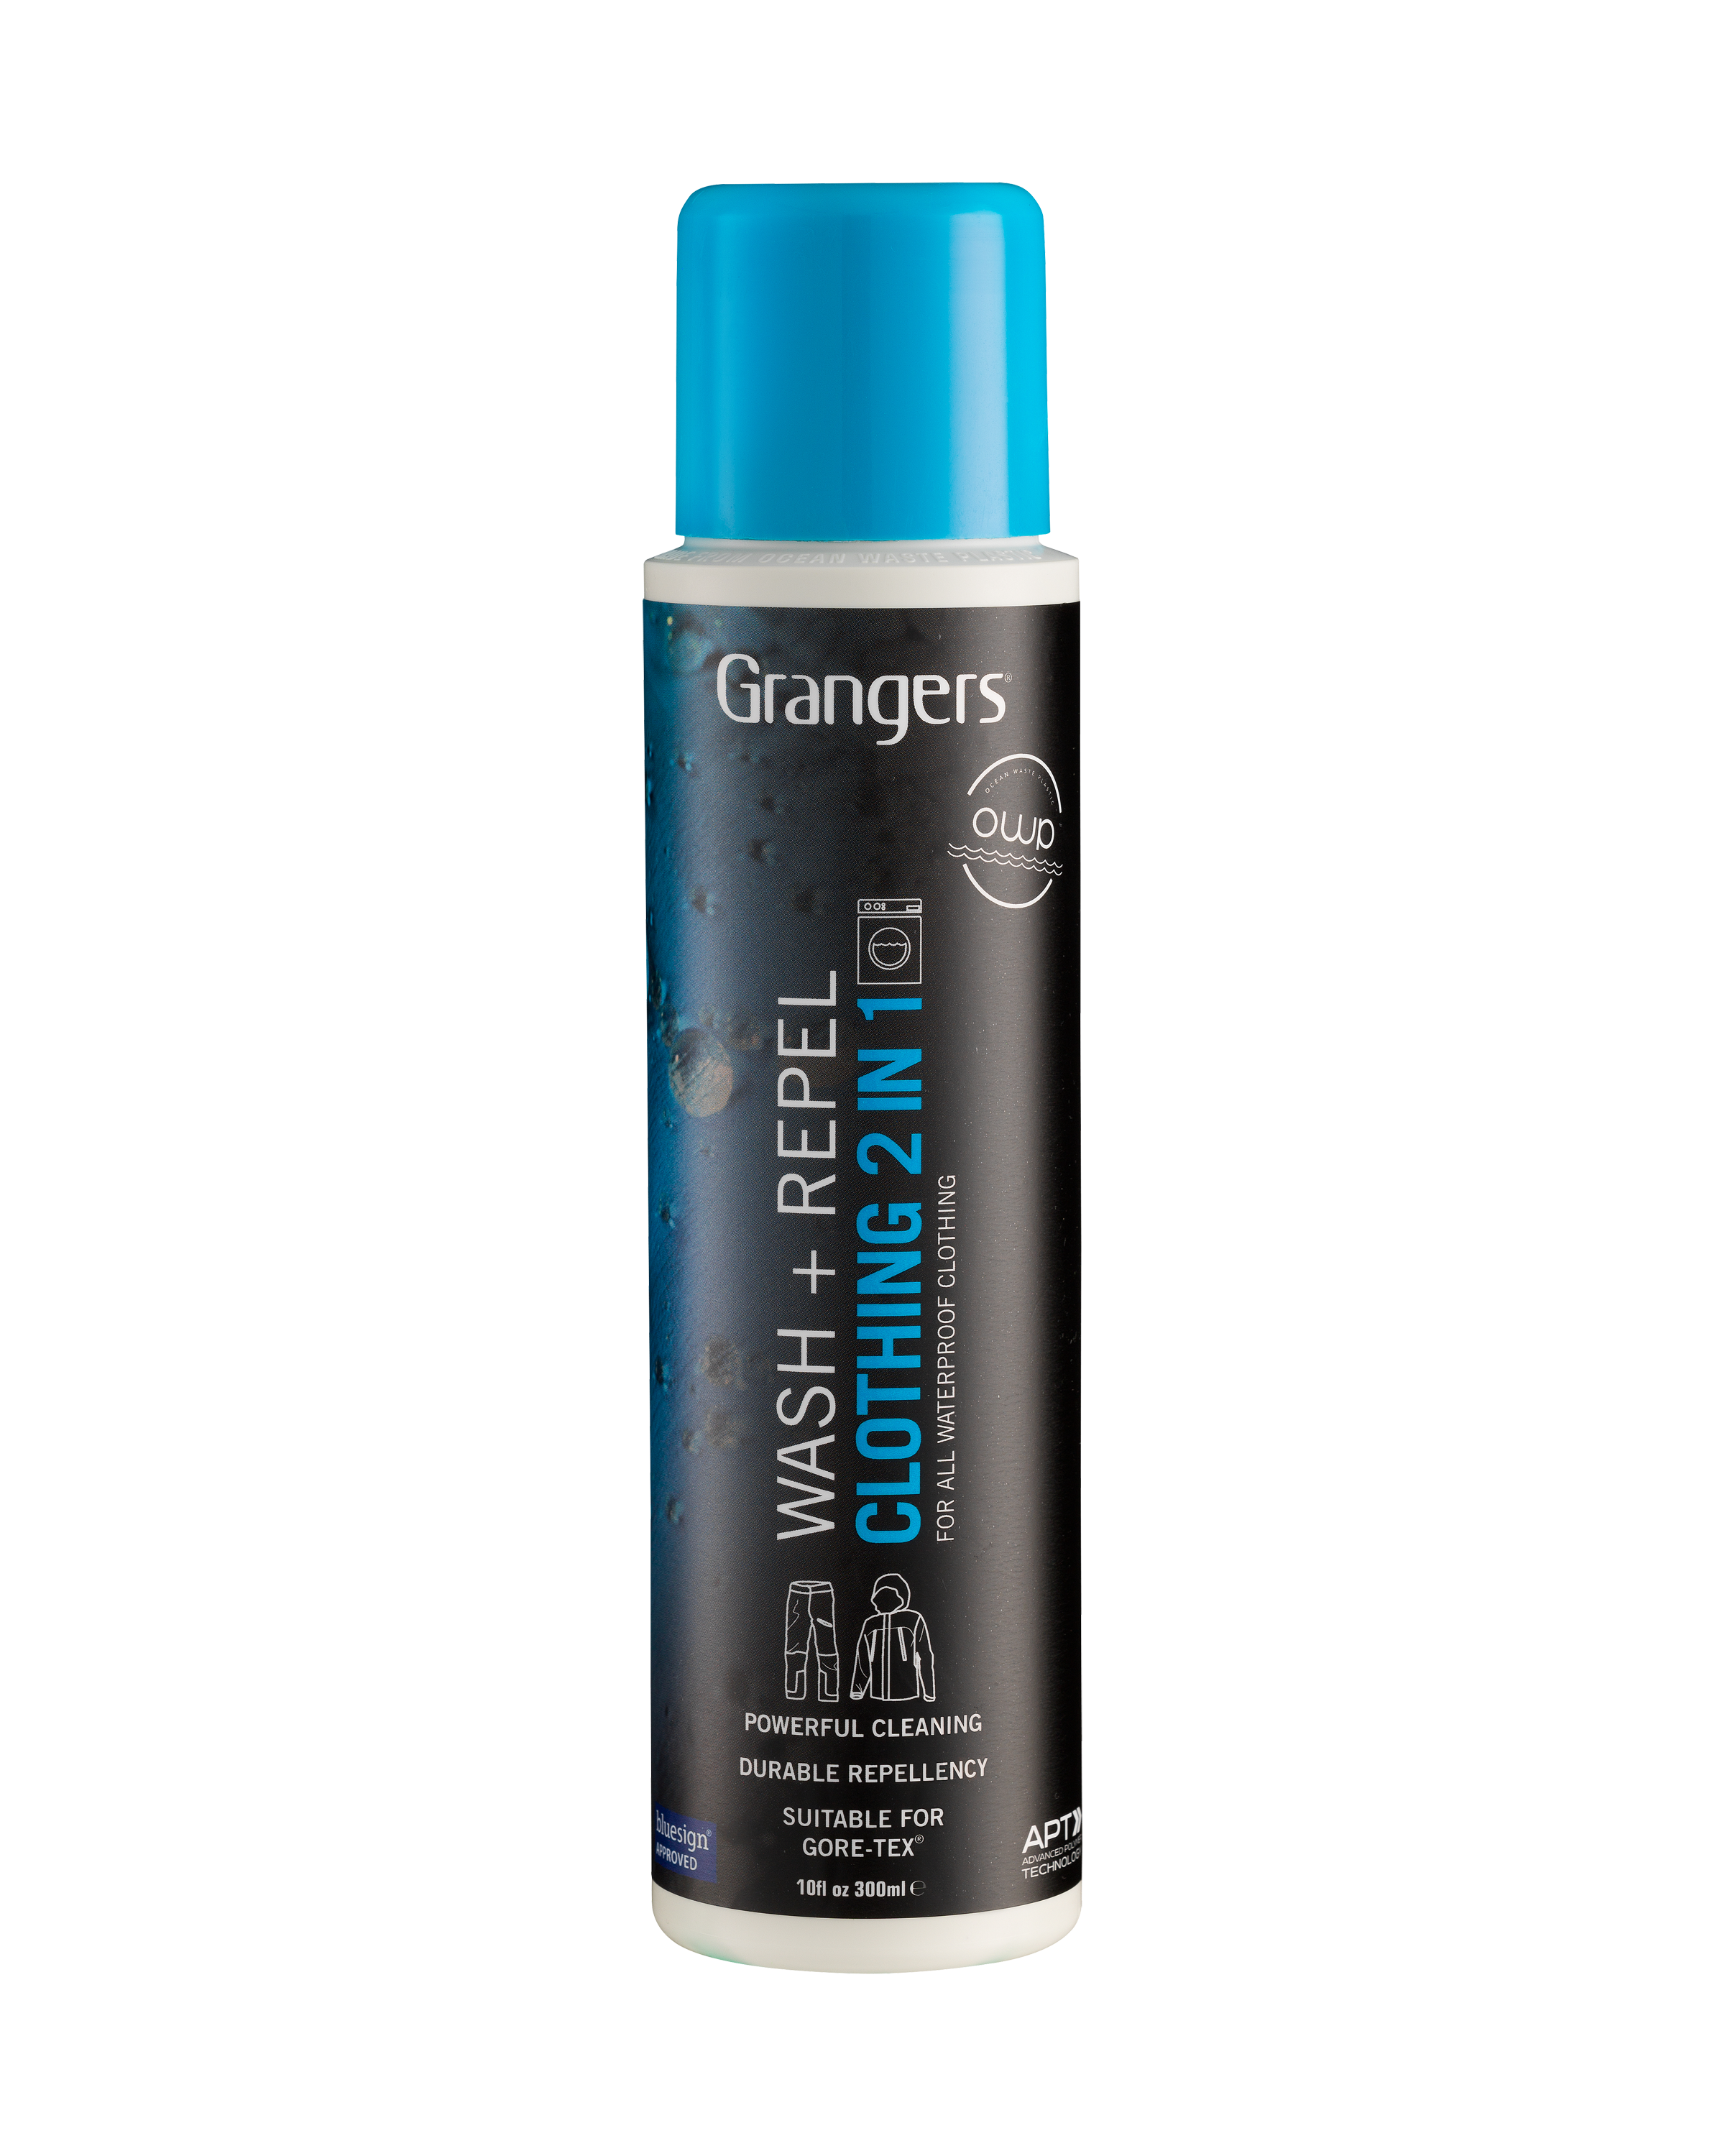 Grangers Wash and Repel Down 2-in-1